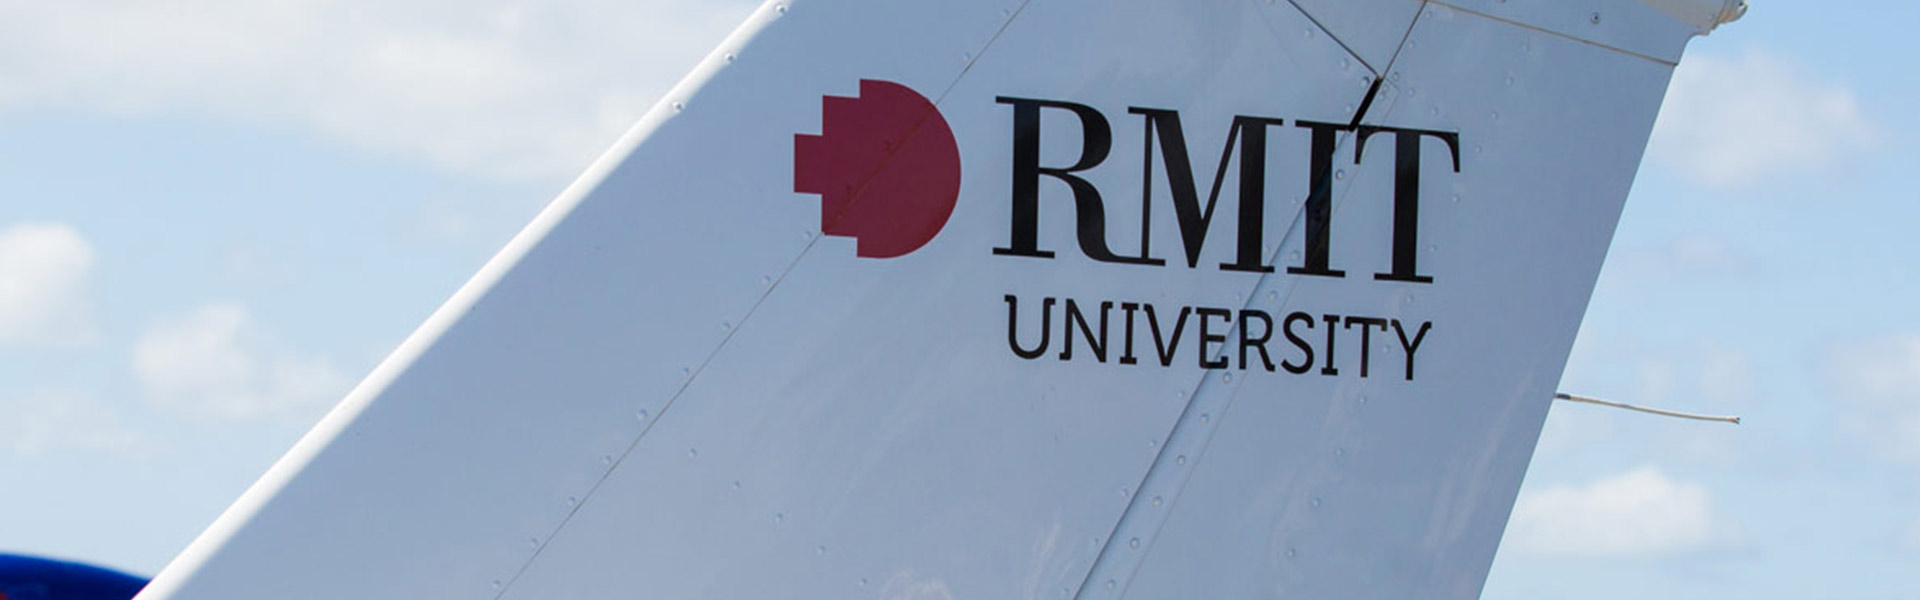 image of plane tail with RMIT logo